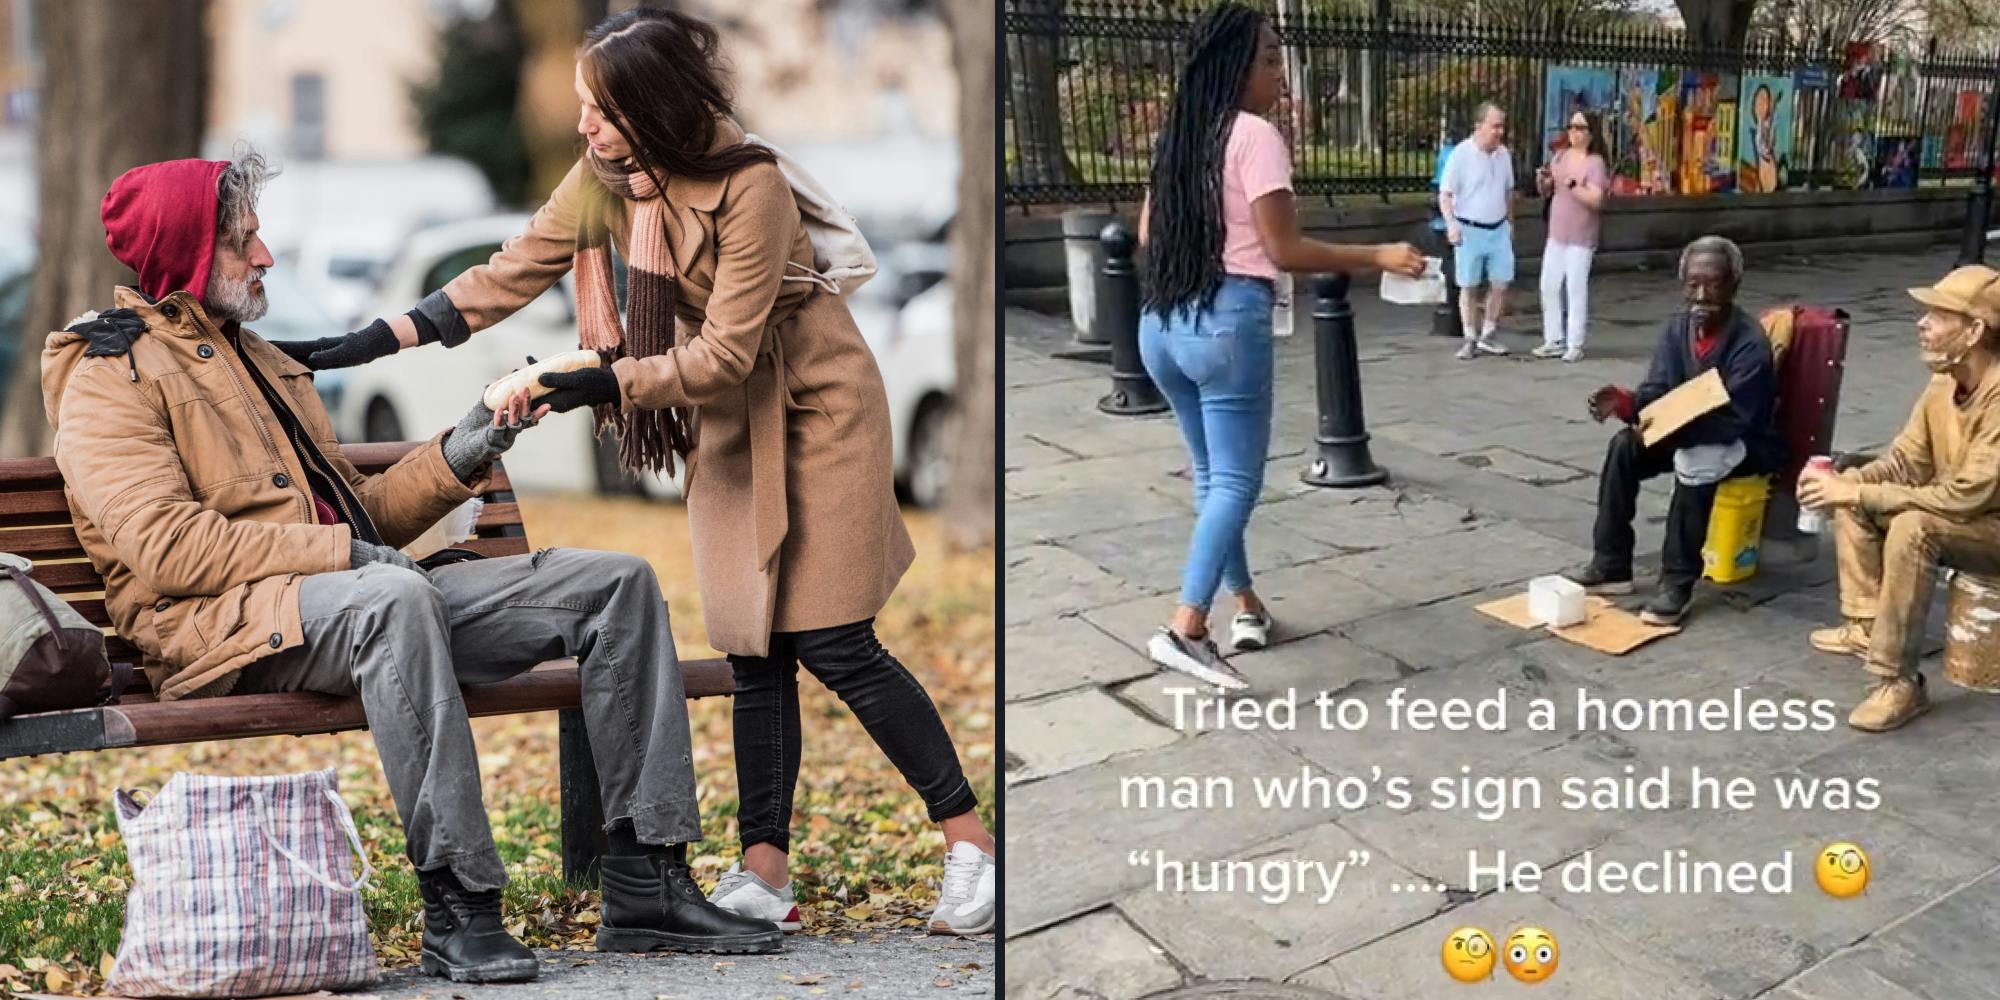 woman in city giving food to homeless (l) woman in city attempting to give homeless food caption " Tried to feed a homeless man who's sign said he was hungry... he declined" (r)